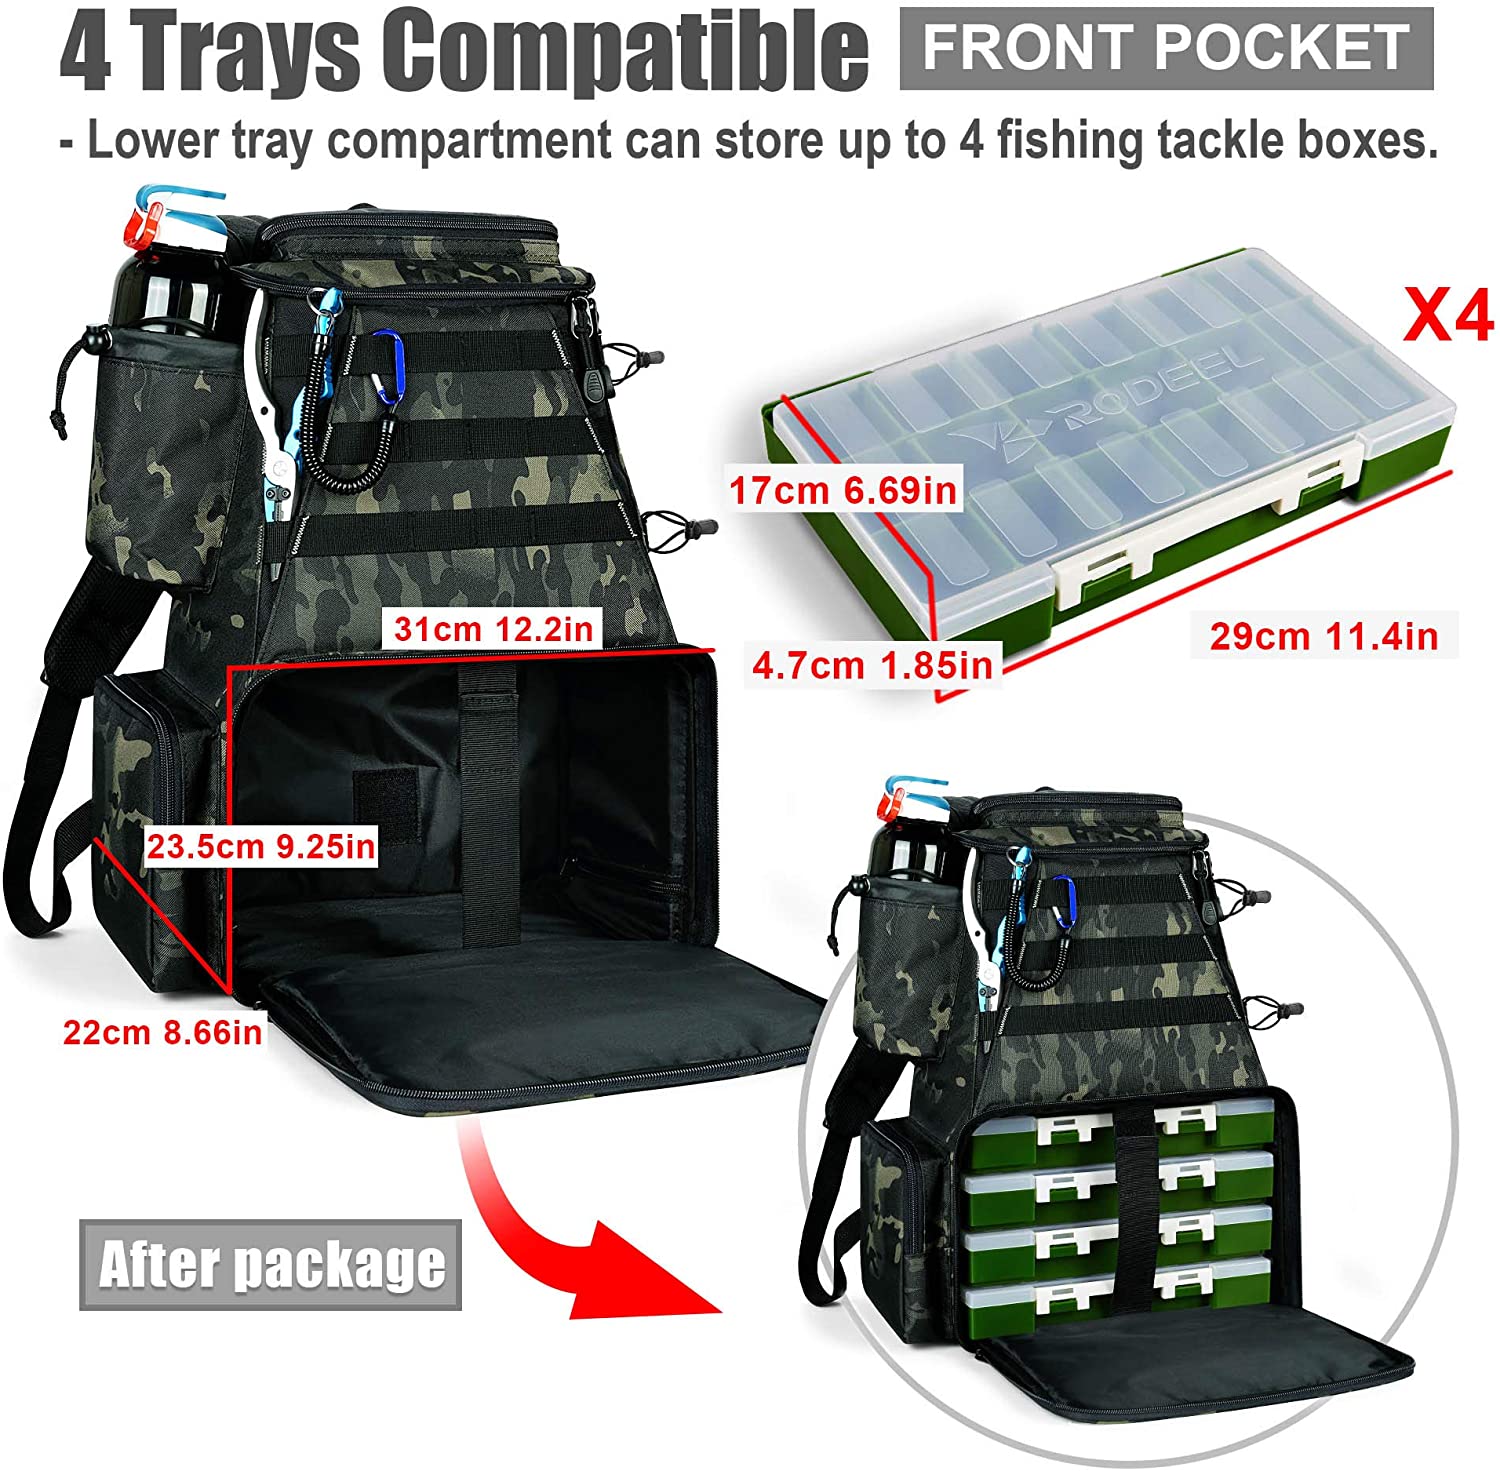 MDSFB-1 Finshing Backpack1